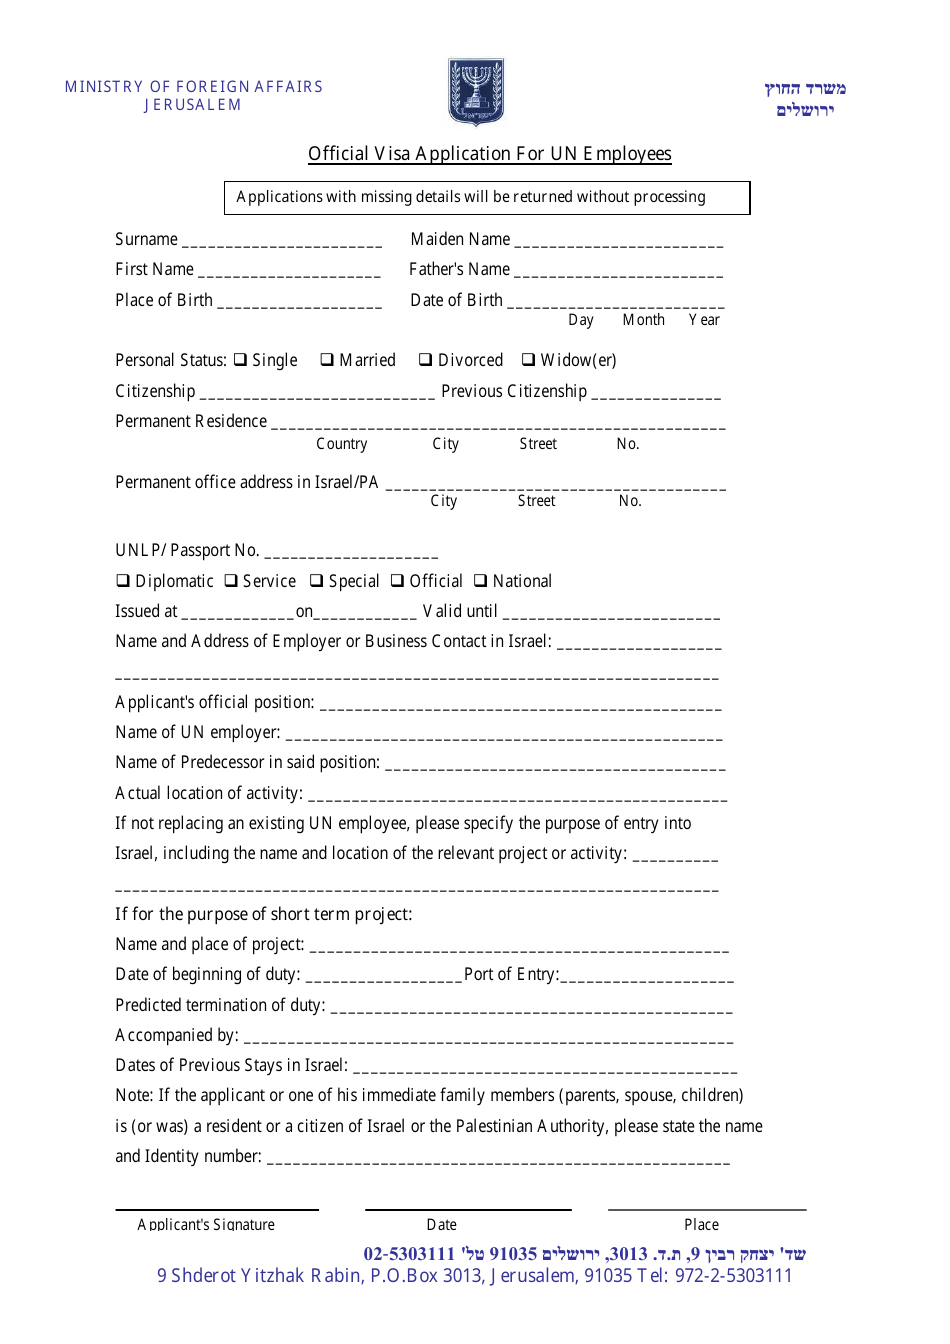 Official Visa Application for Un Employees - Jerusalem, Israel, Page 1